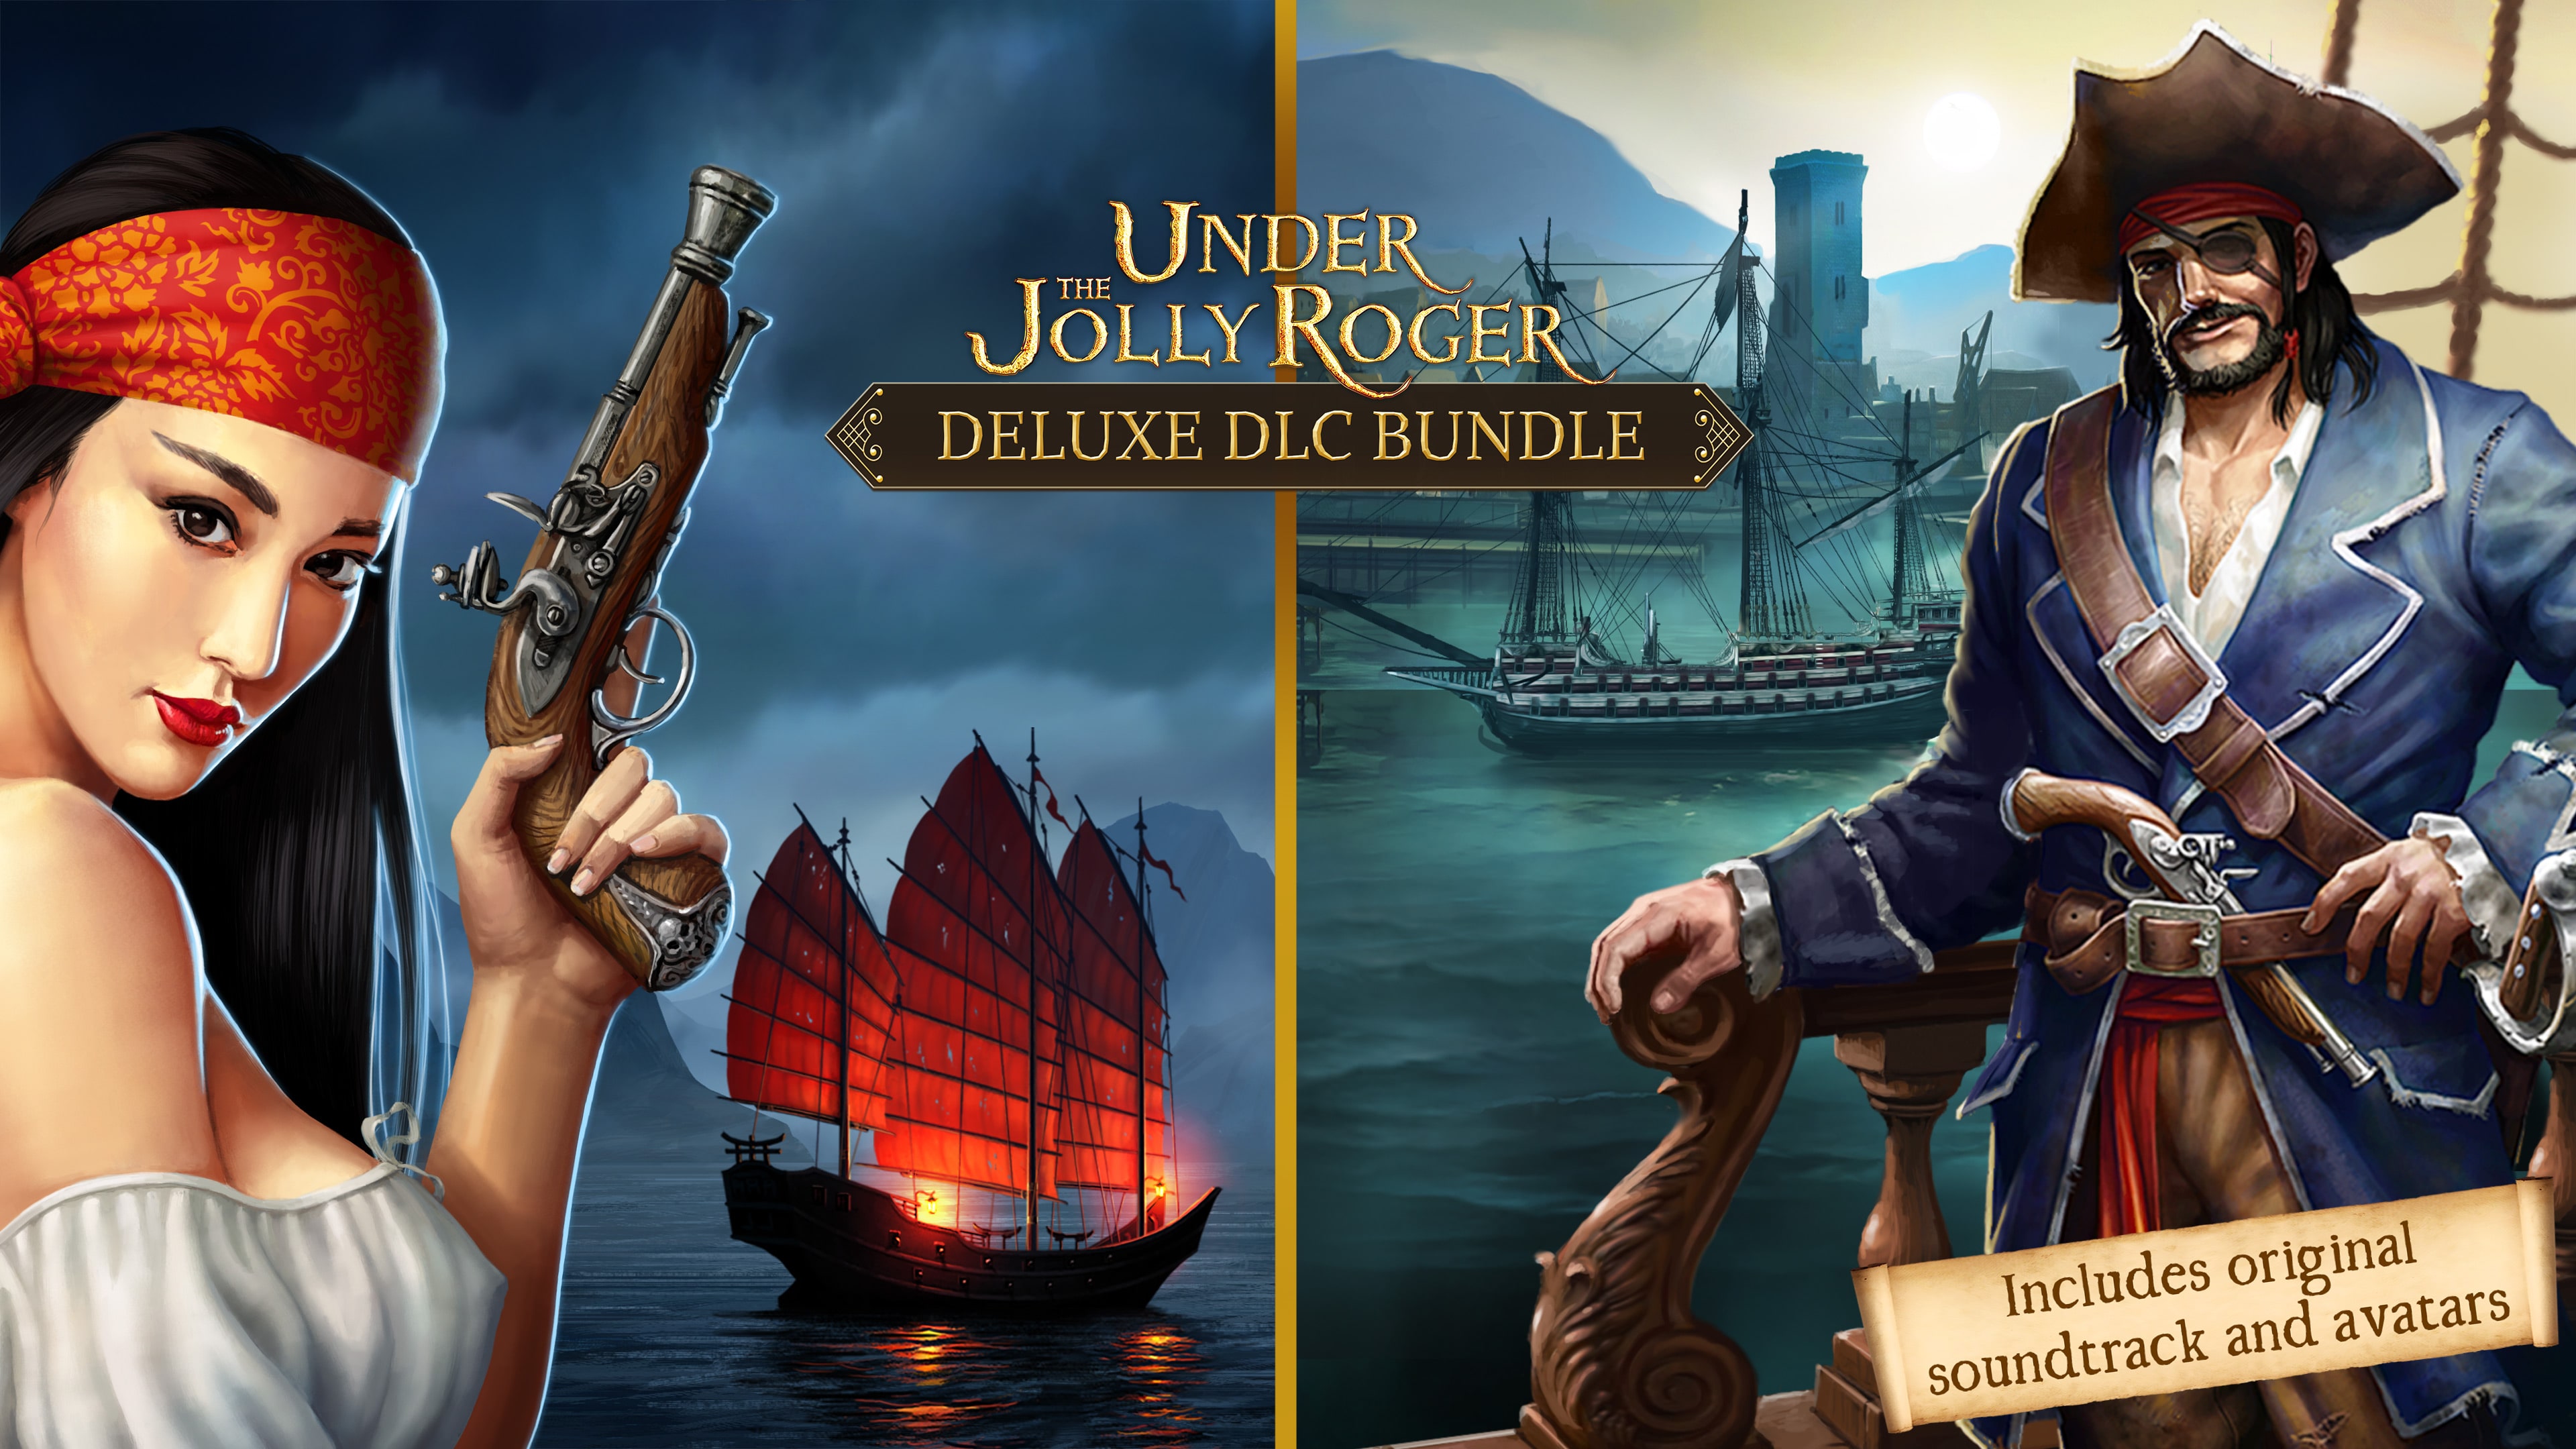 Under the Jolly Roger - Deluxe DLC Bundle (중국어(간체자), 영어, 일본어)